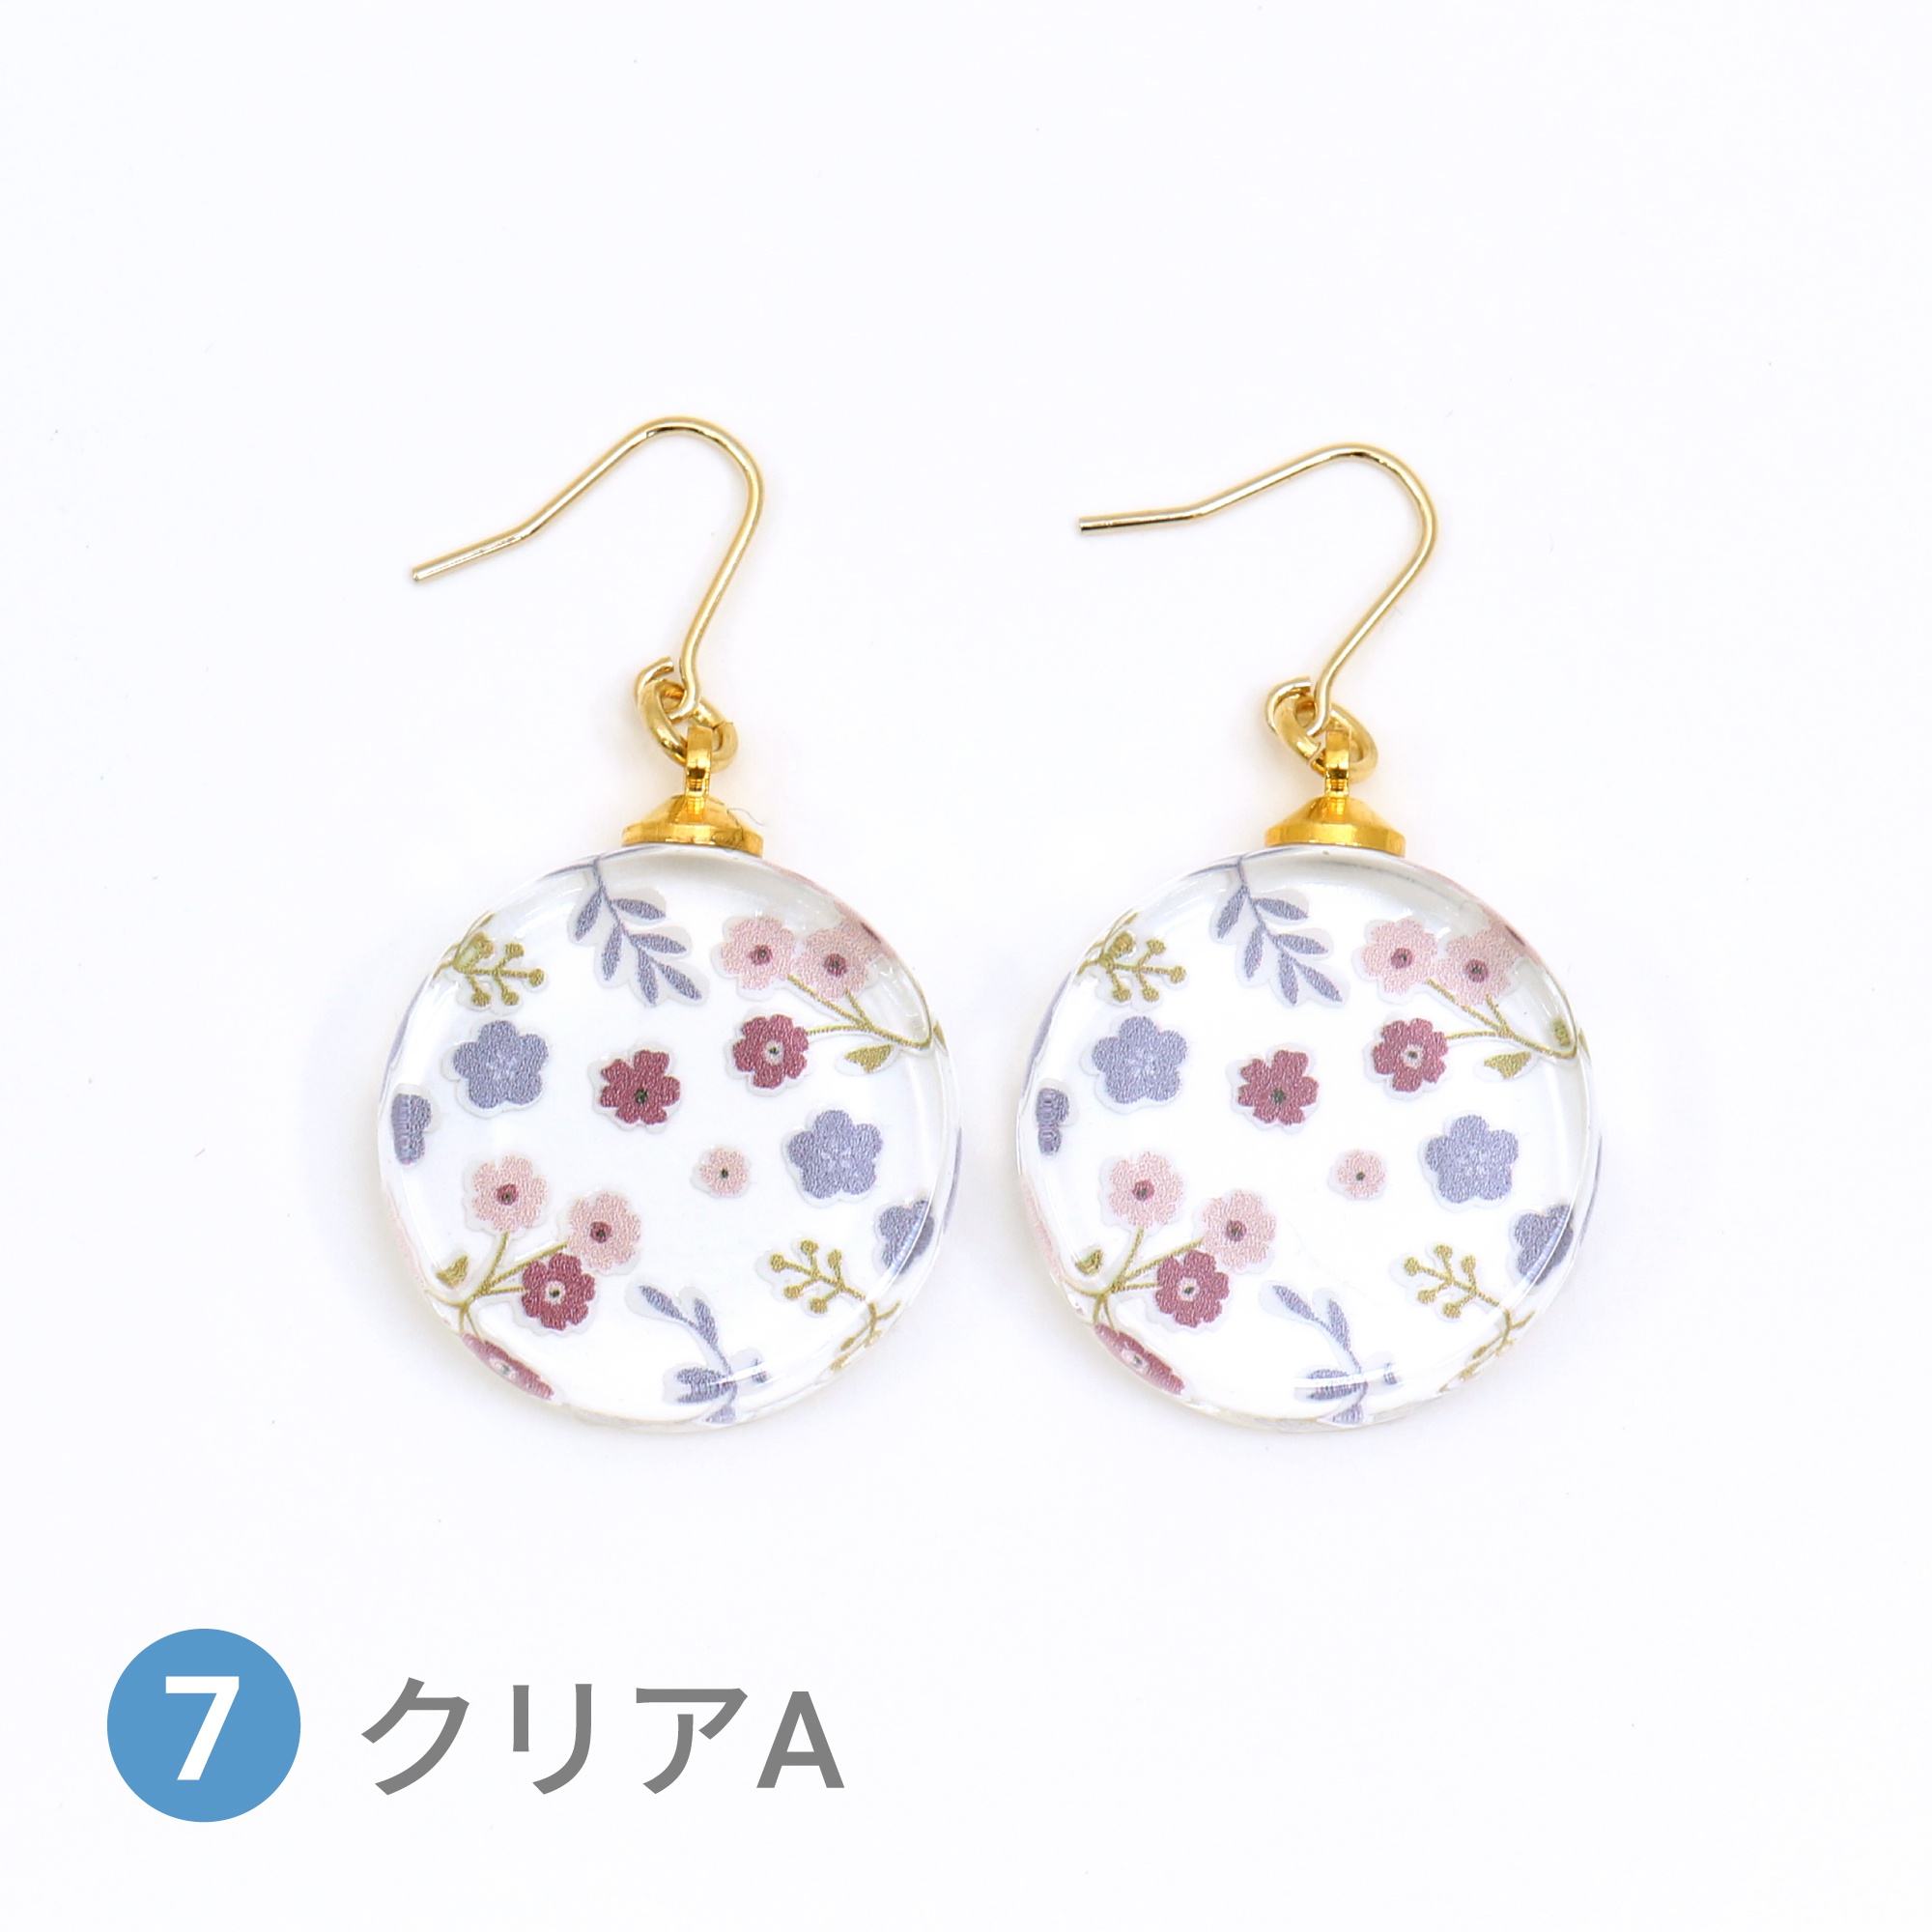 Glass accessories Pierced Earring FLORAL PATTERN clear A round shape